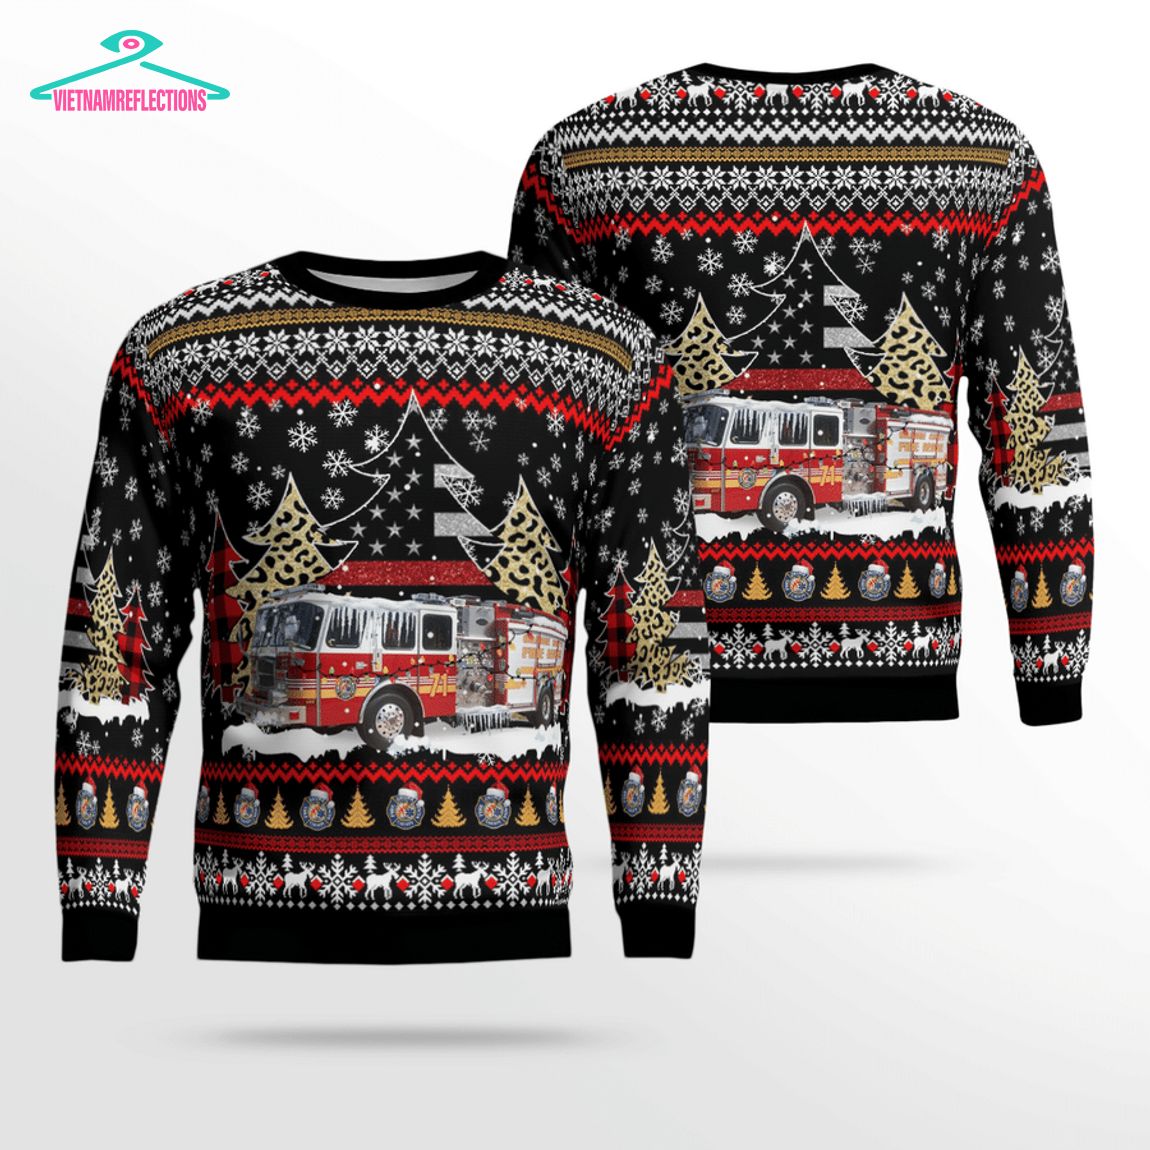 Florida Orange County Fire Rescue Department 3D Christmas Sweater